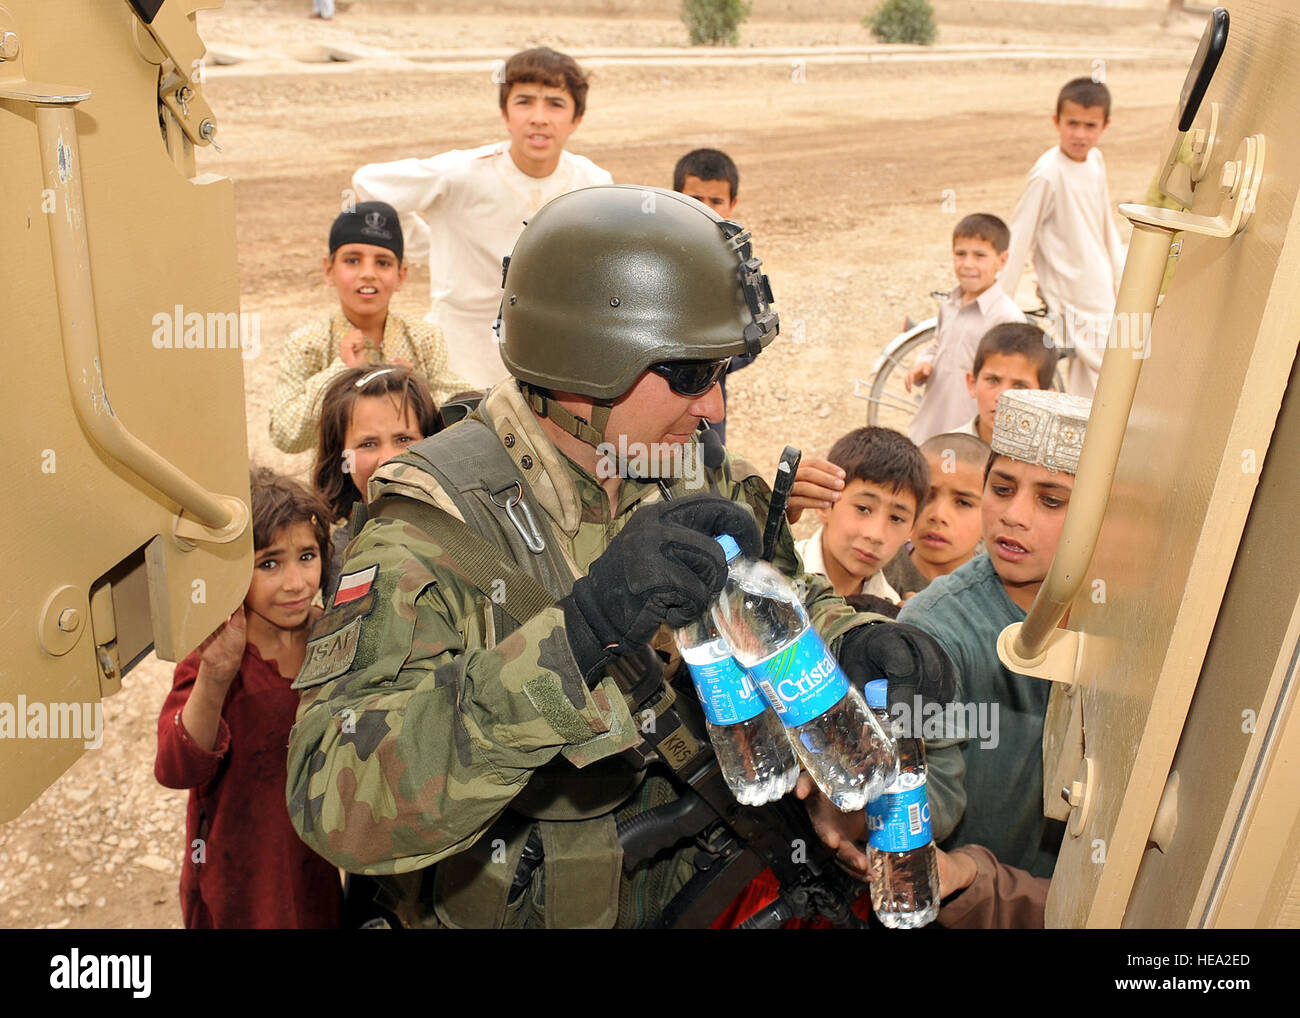 GHAZNI PROVINCE, Afghanistan– A Polish soldier distributes water to Afghan children during a visit to Returnee village located in Ghazni province, June 26. Return village houses displaced Afghan families, who previously fled their homes in search more secure and more stable areas to live in.  U.S. Air Force Tech Sgt. J.T. May III, Ghazni Provincial Reconstruction Team Public Affairs) Stock Photo